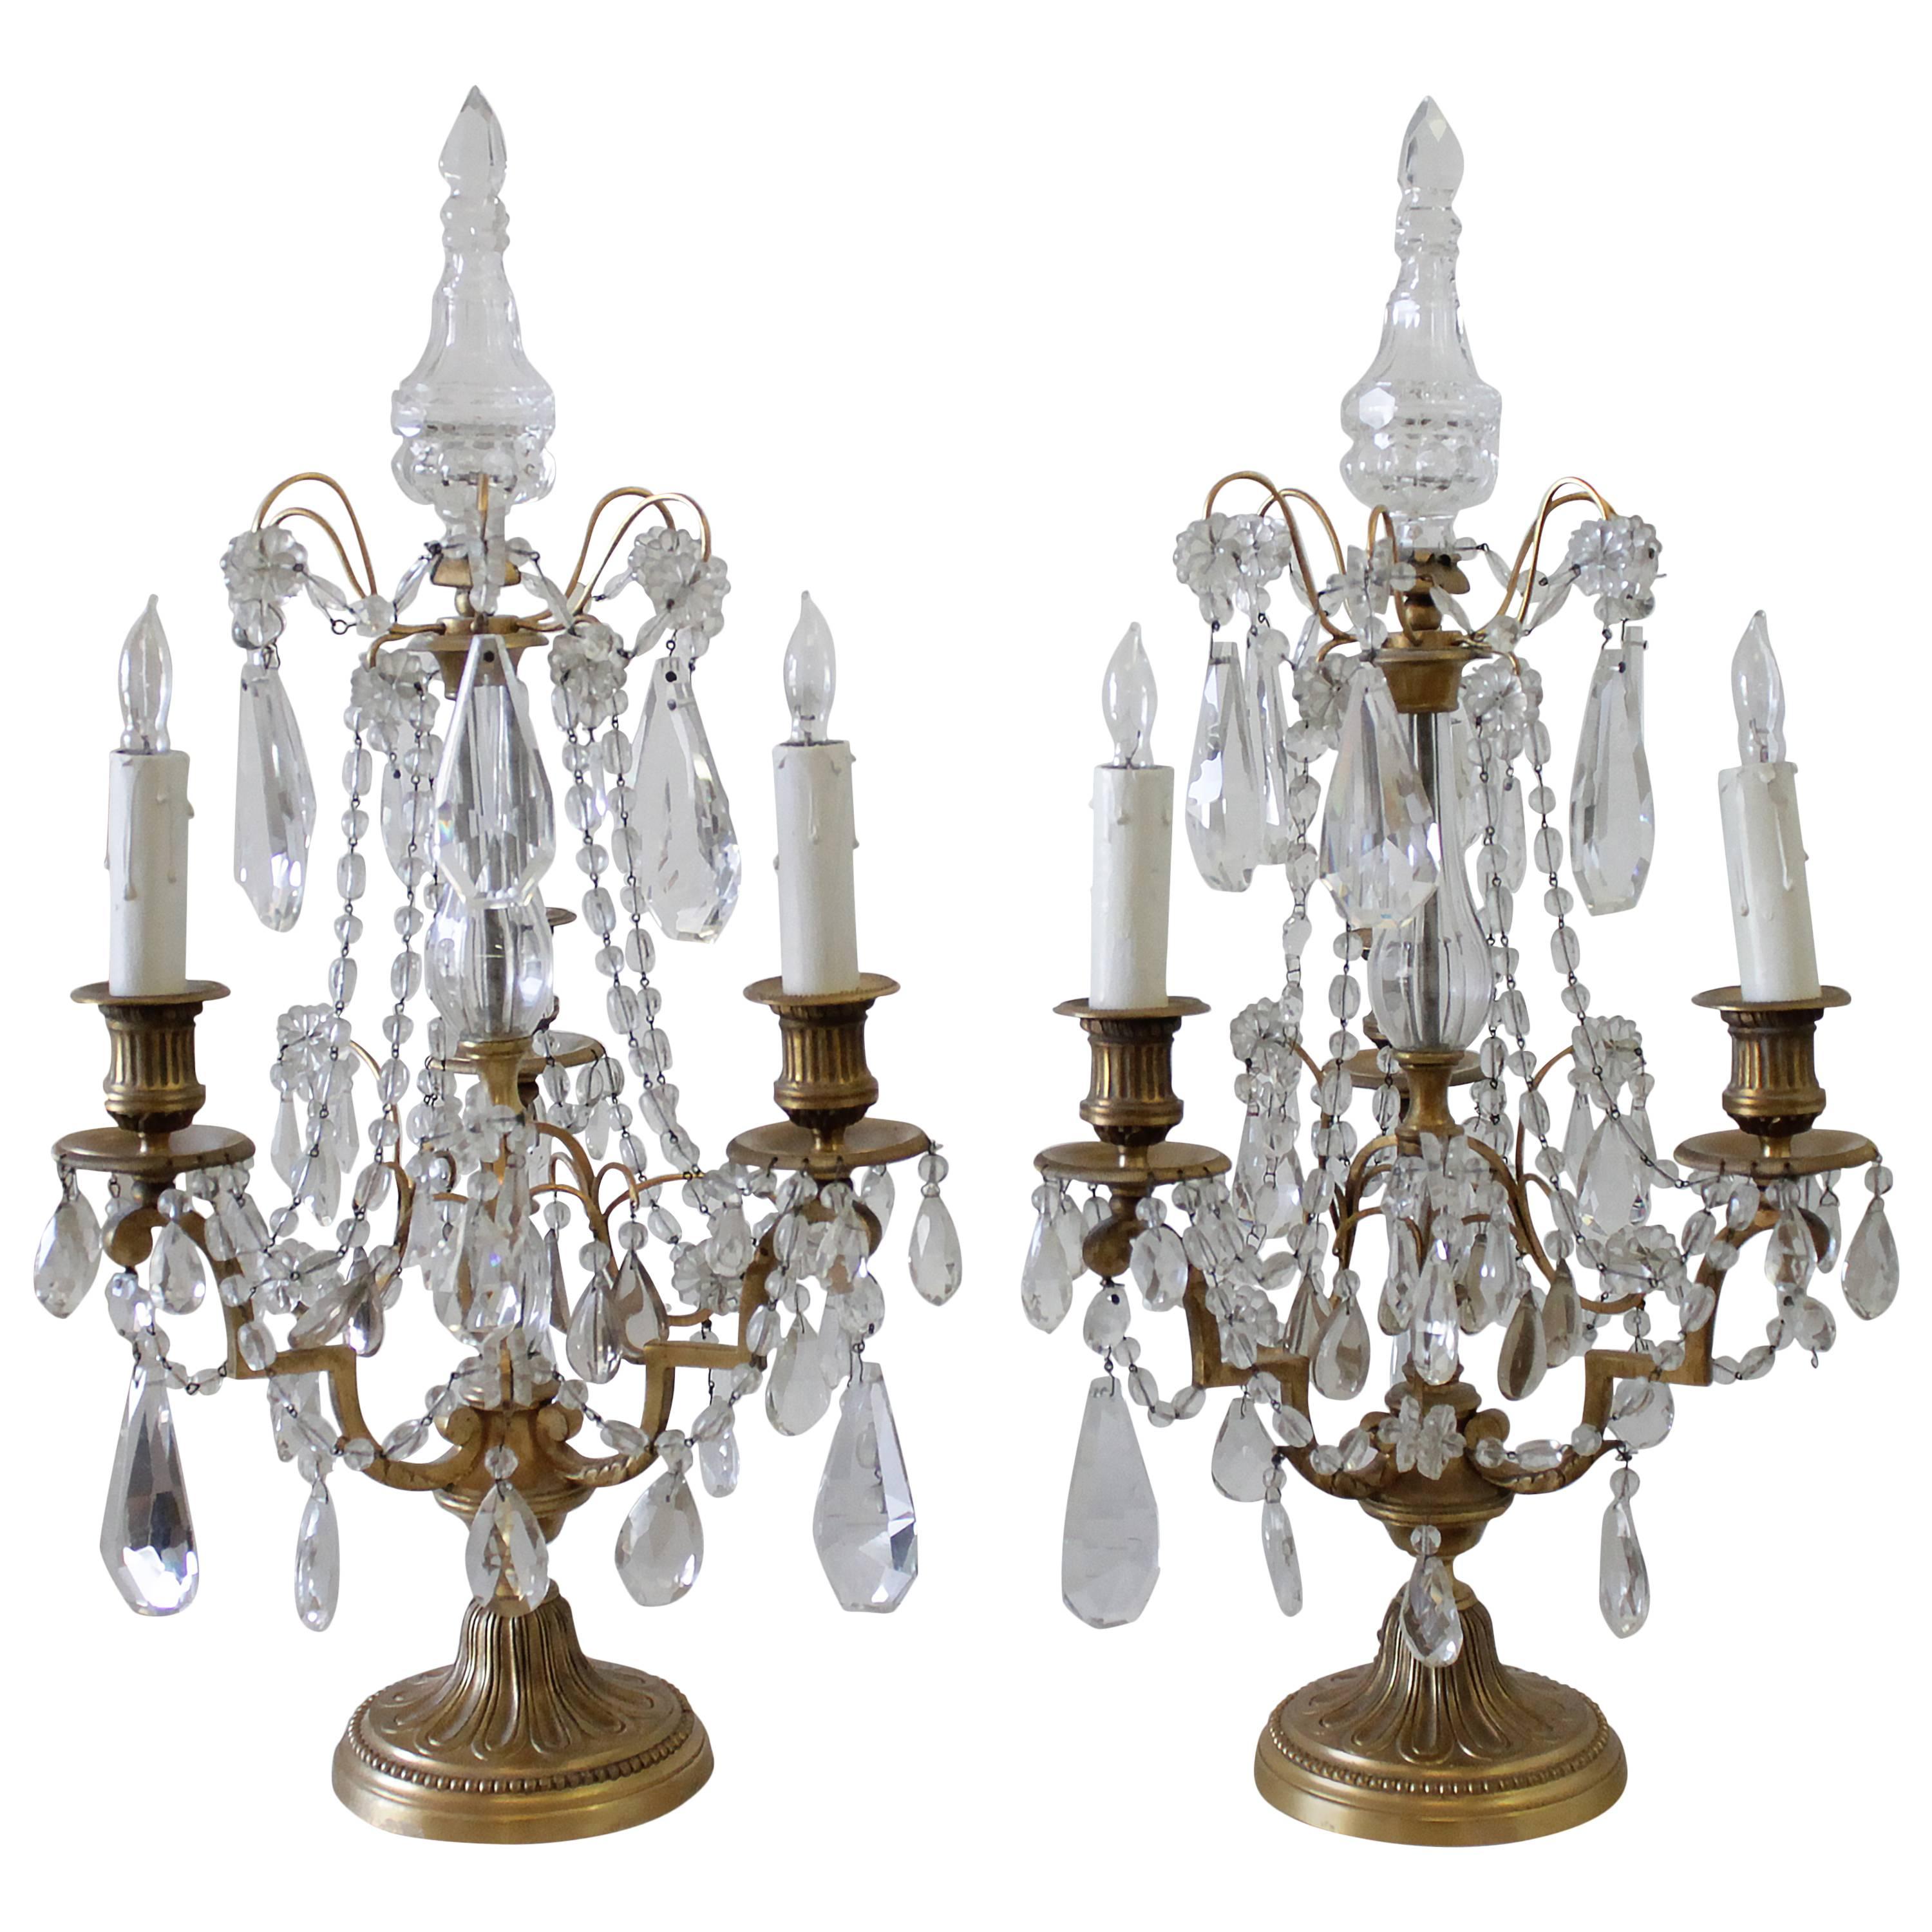 Pair of French Brass and Crystal Three-Light Girandole Chandelier Lamps